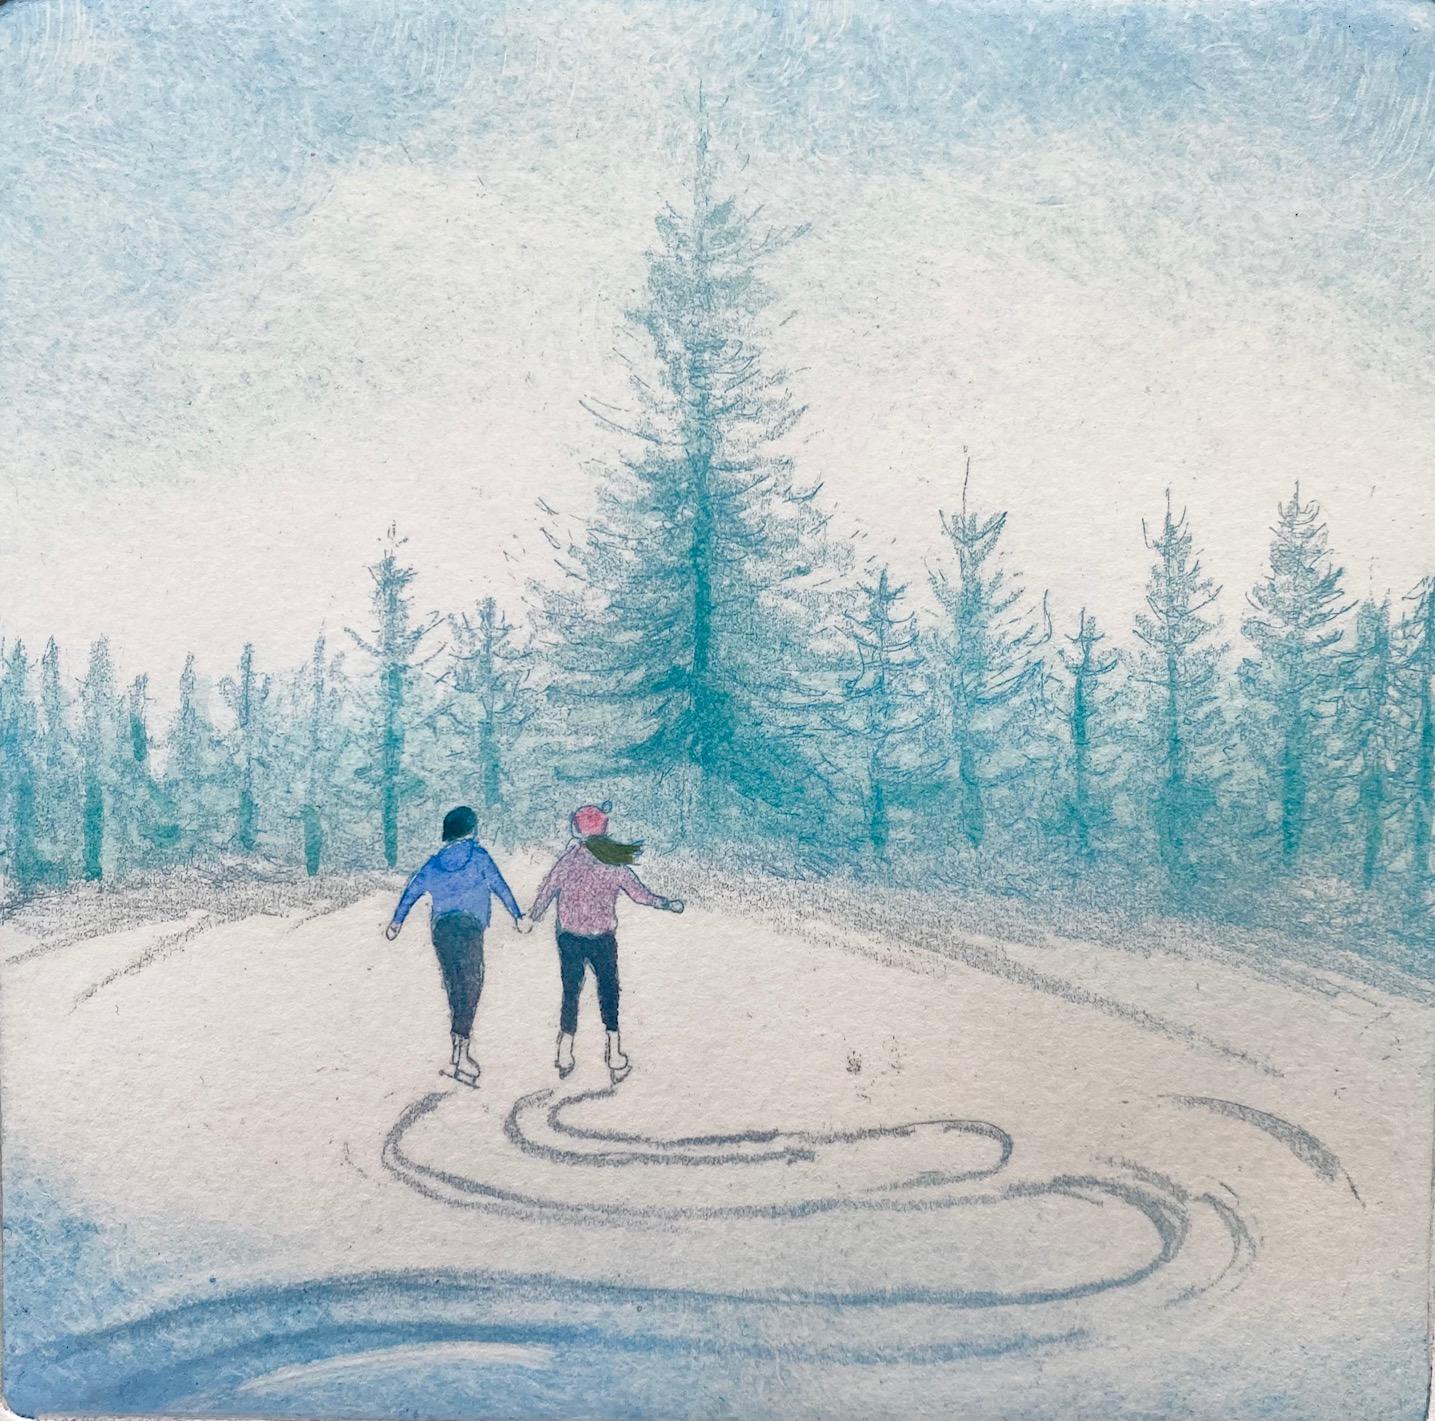 Winter Skate by Rebecca Denton [2021]

limited_edition
Etching
Edition number /40
Image size: H:15 cm x W:15 cm
Complete Size of Unframed Work: H:27 cm x W:27 cm x D:0.1cm
Sold Unframed
Please note that insitu images are purely an indication of how